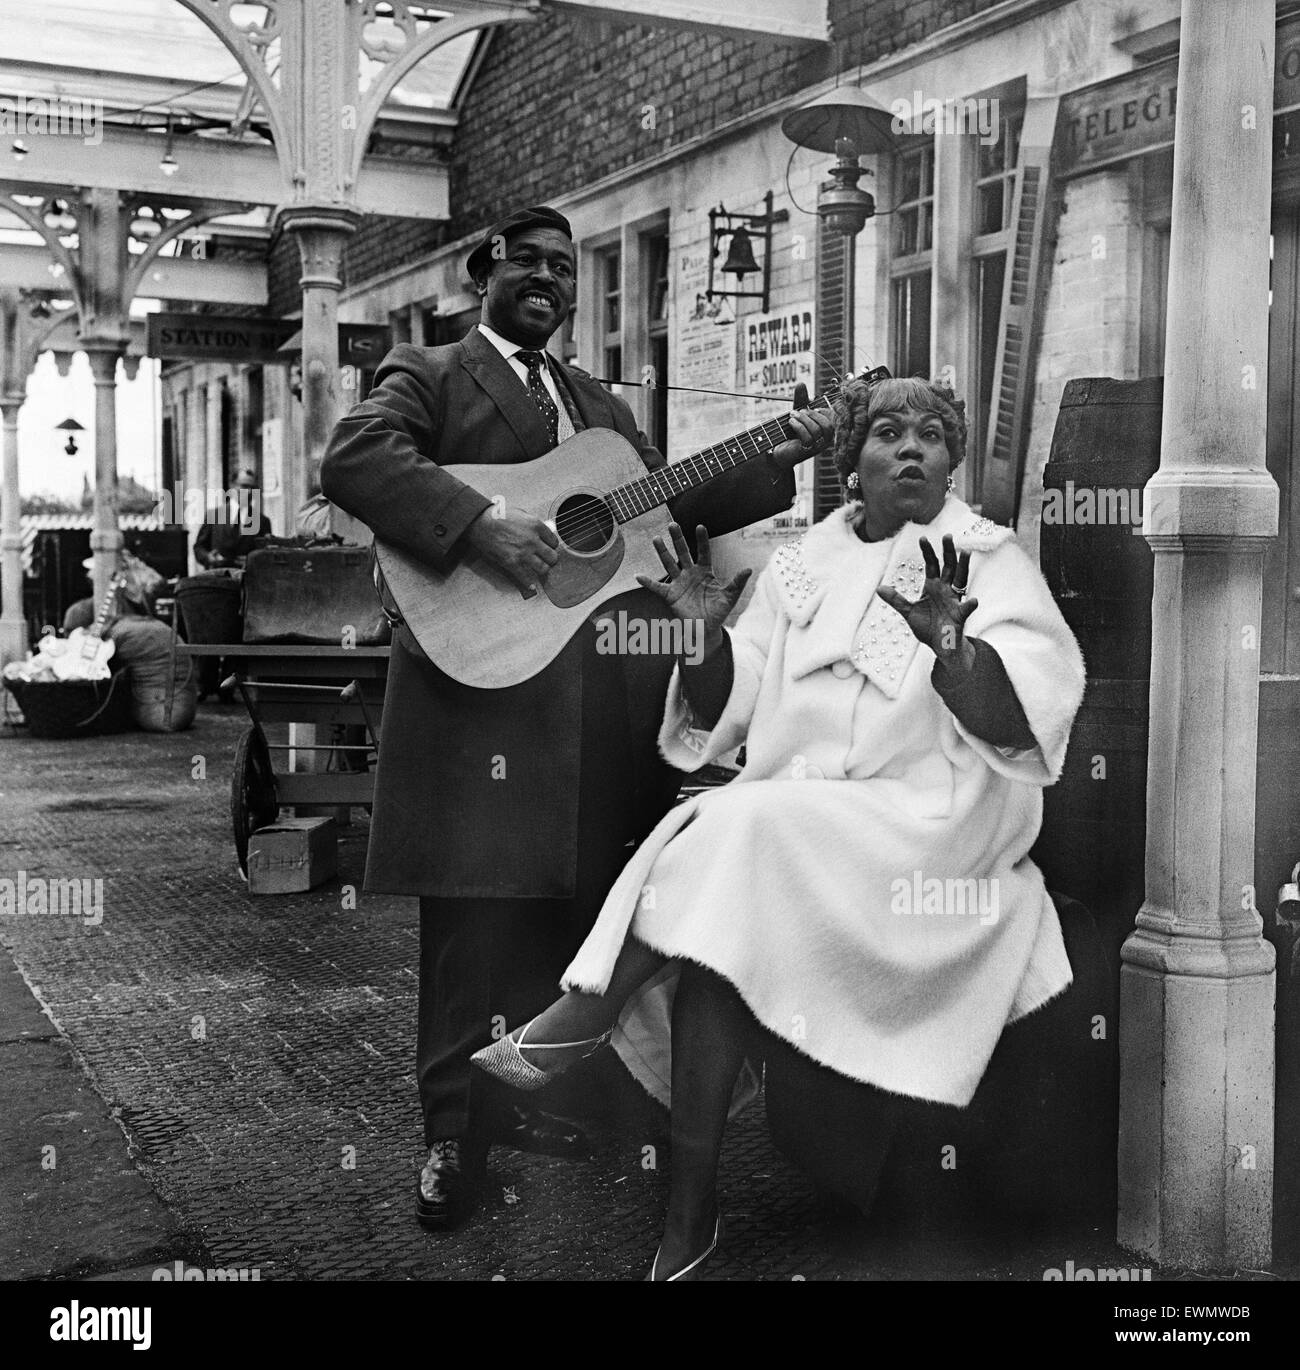 Granada TV films their 'Blues and Gospel Train' music show at the derelict railway station of Wilbraham Road, Manchester. Sister Rosetta Tharpe and Brownie McGhee sing a blues number. 7th May 1964. Stock Photo